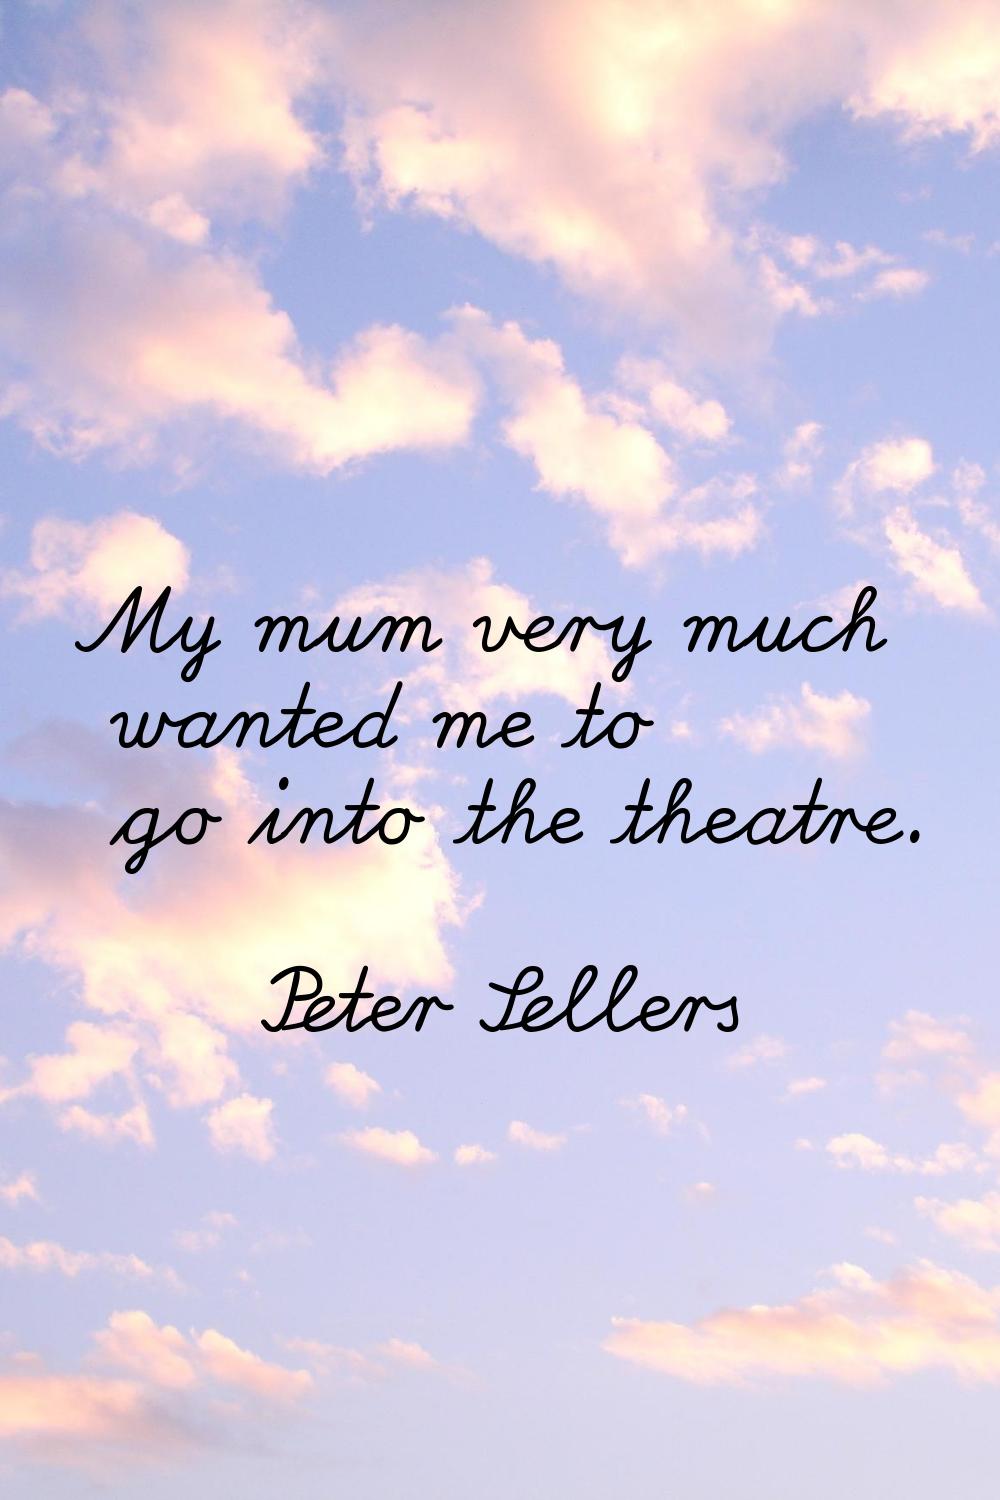 My mum very much wanted me to go into the theatre.